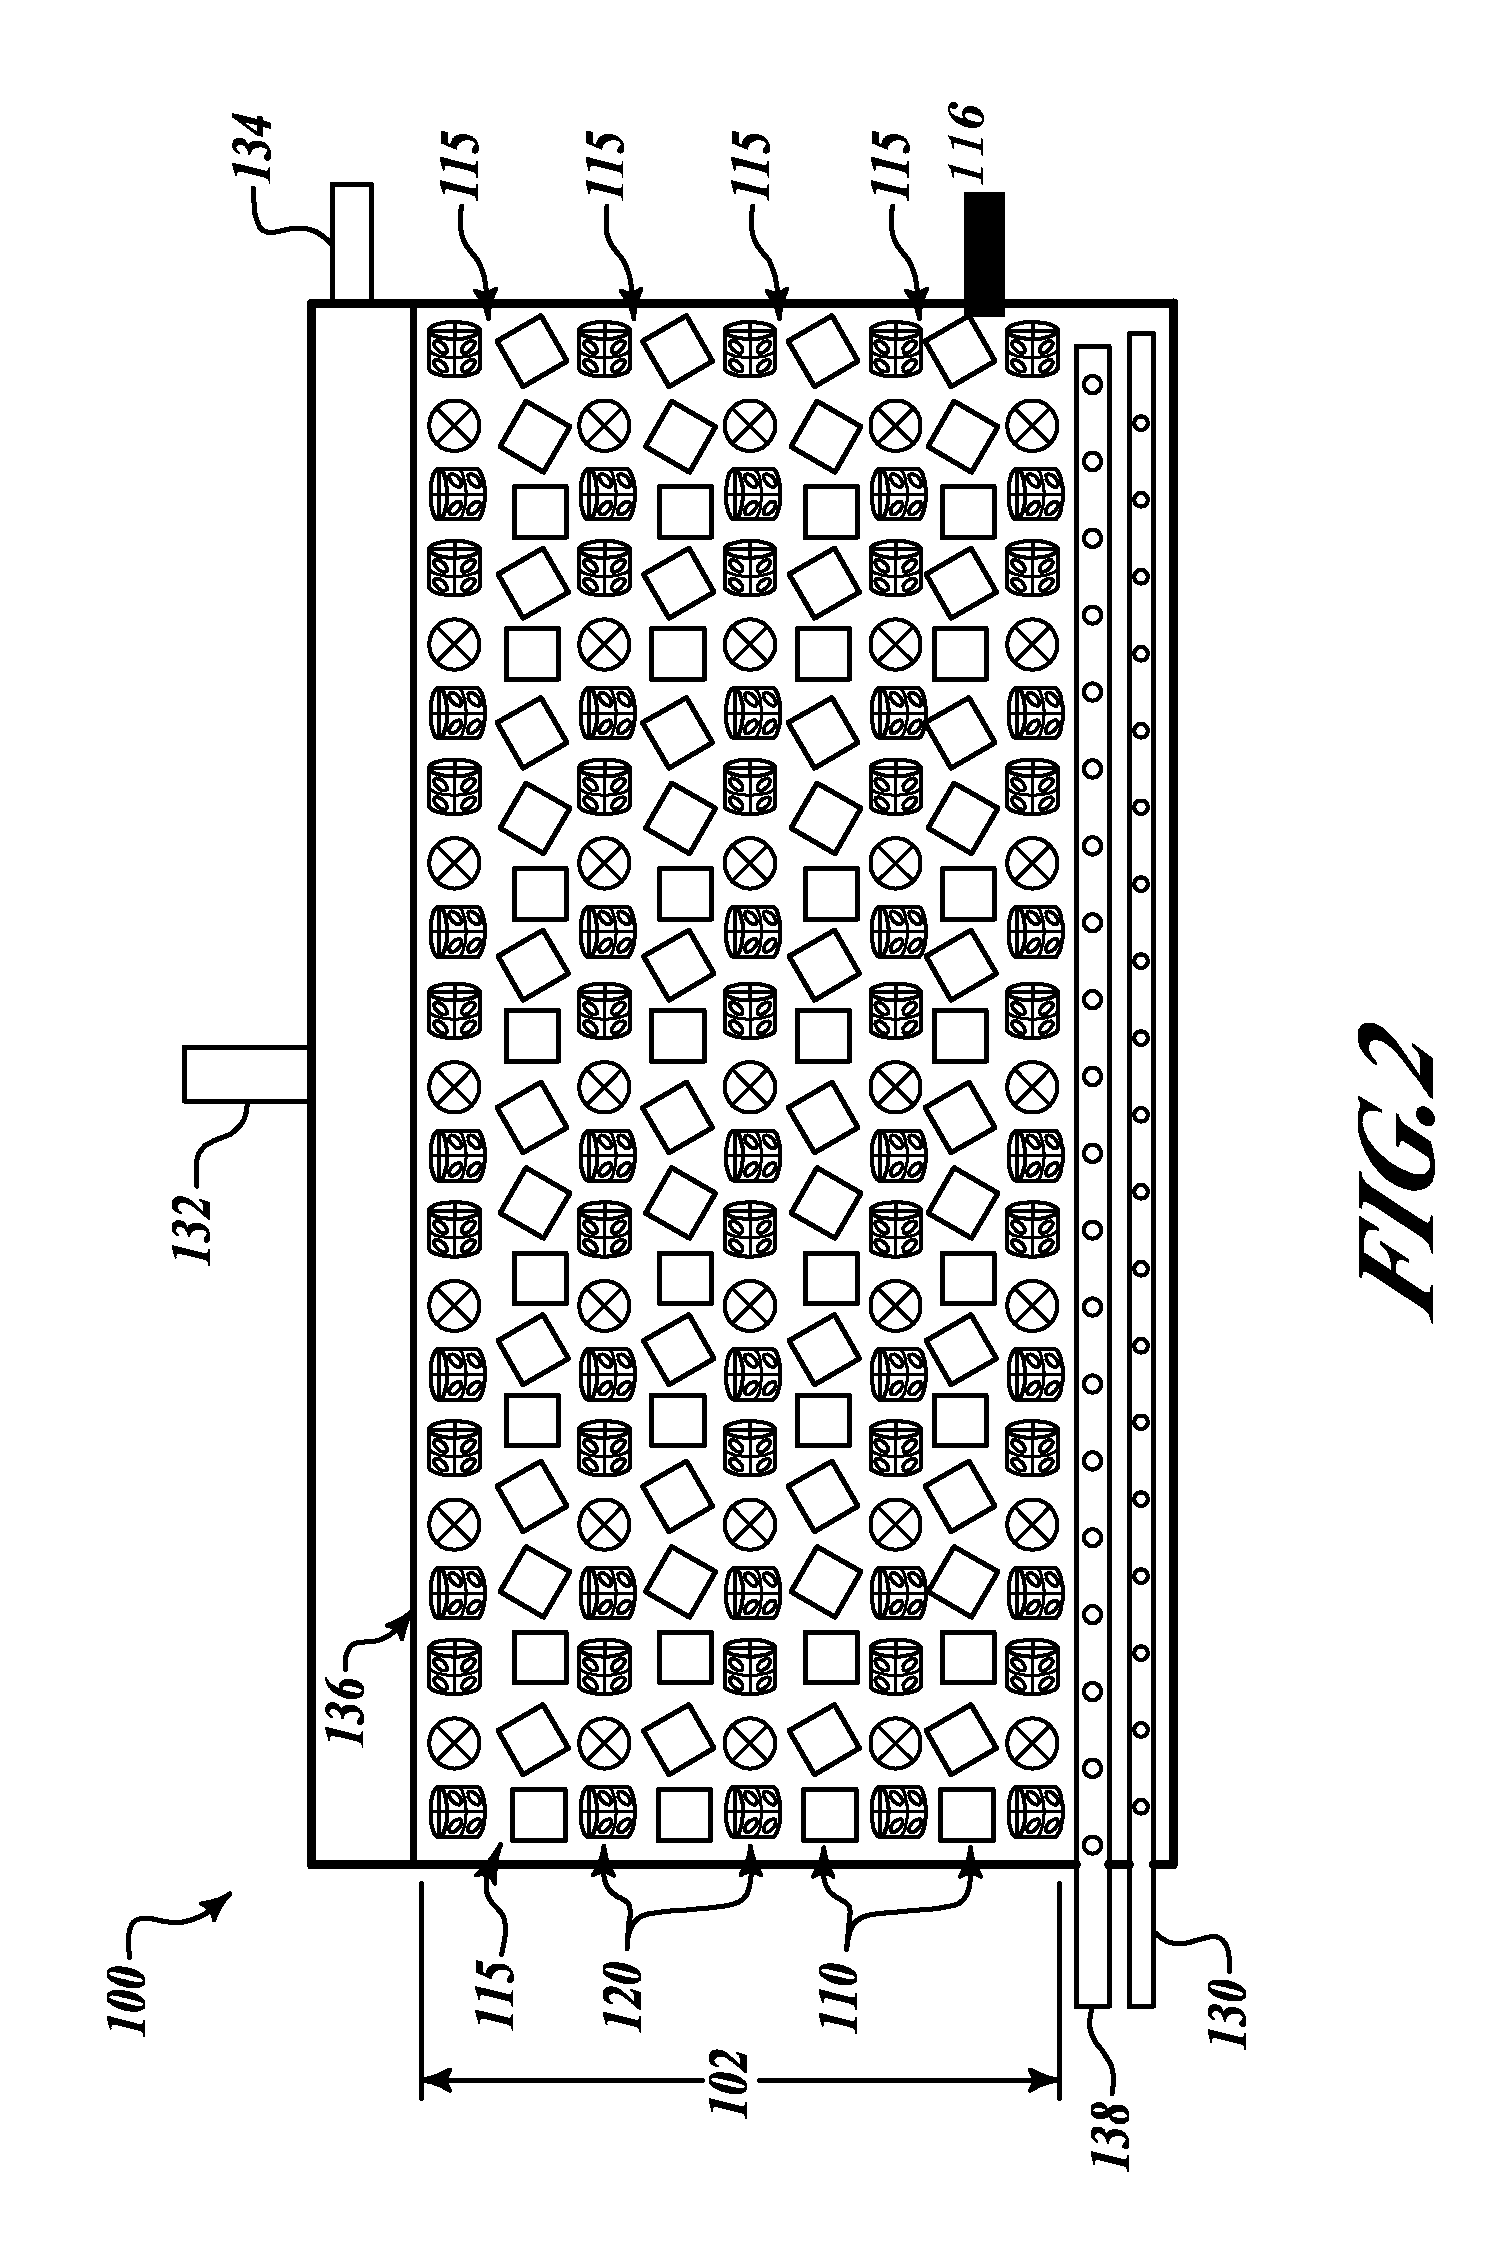 Process reactor with layered packed bed